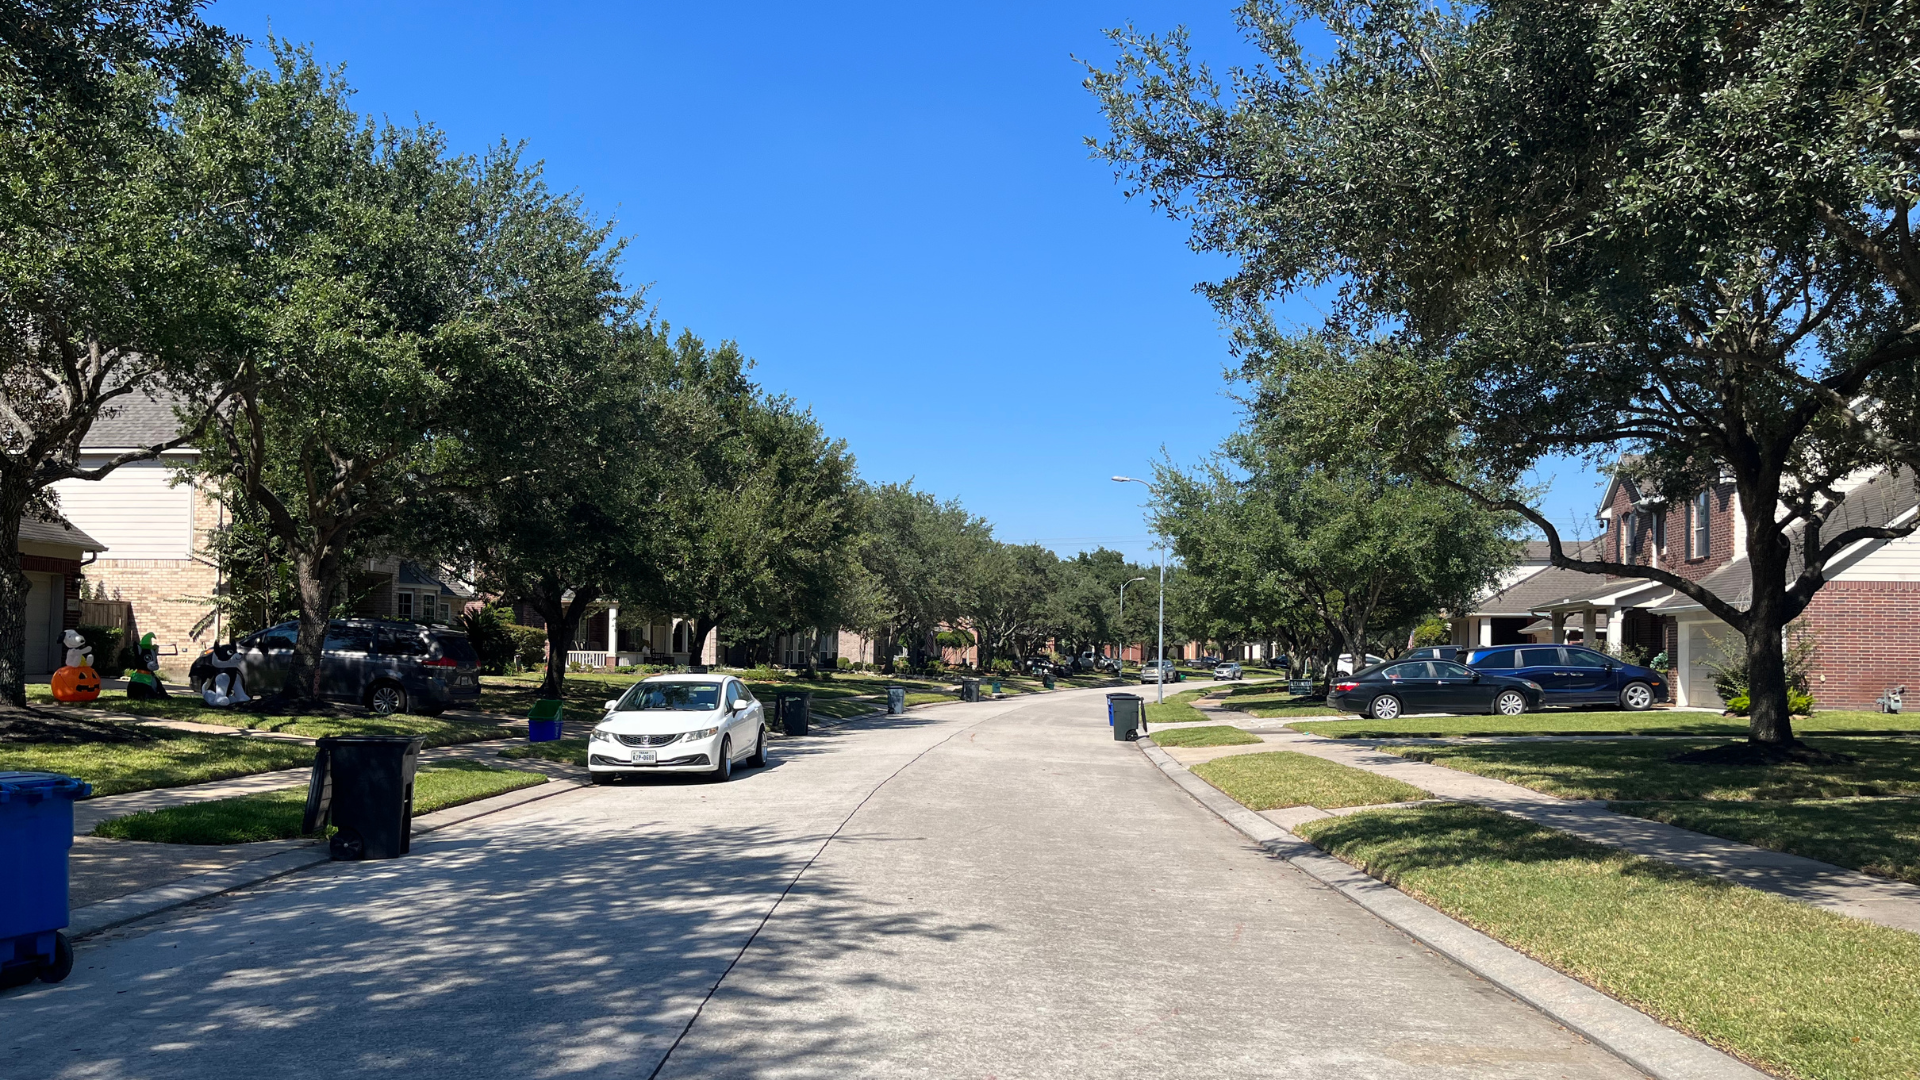 The Falls Creek neighborhood, which is just across Greens Bayou from Allen Field, one of the neighborhoods being bought out. (Alex Lubben / VICE News)